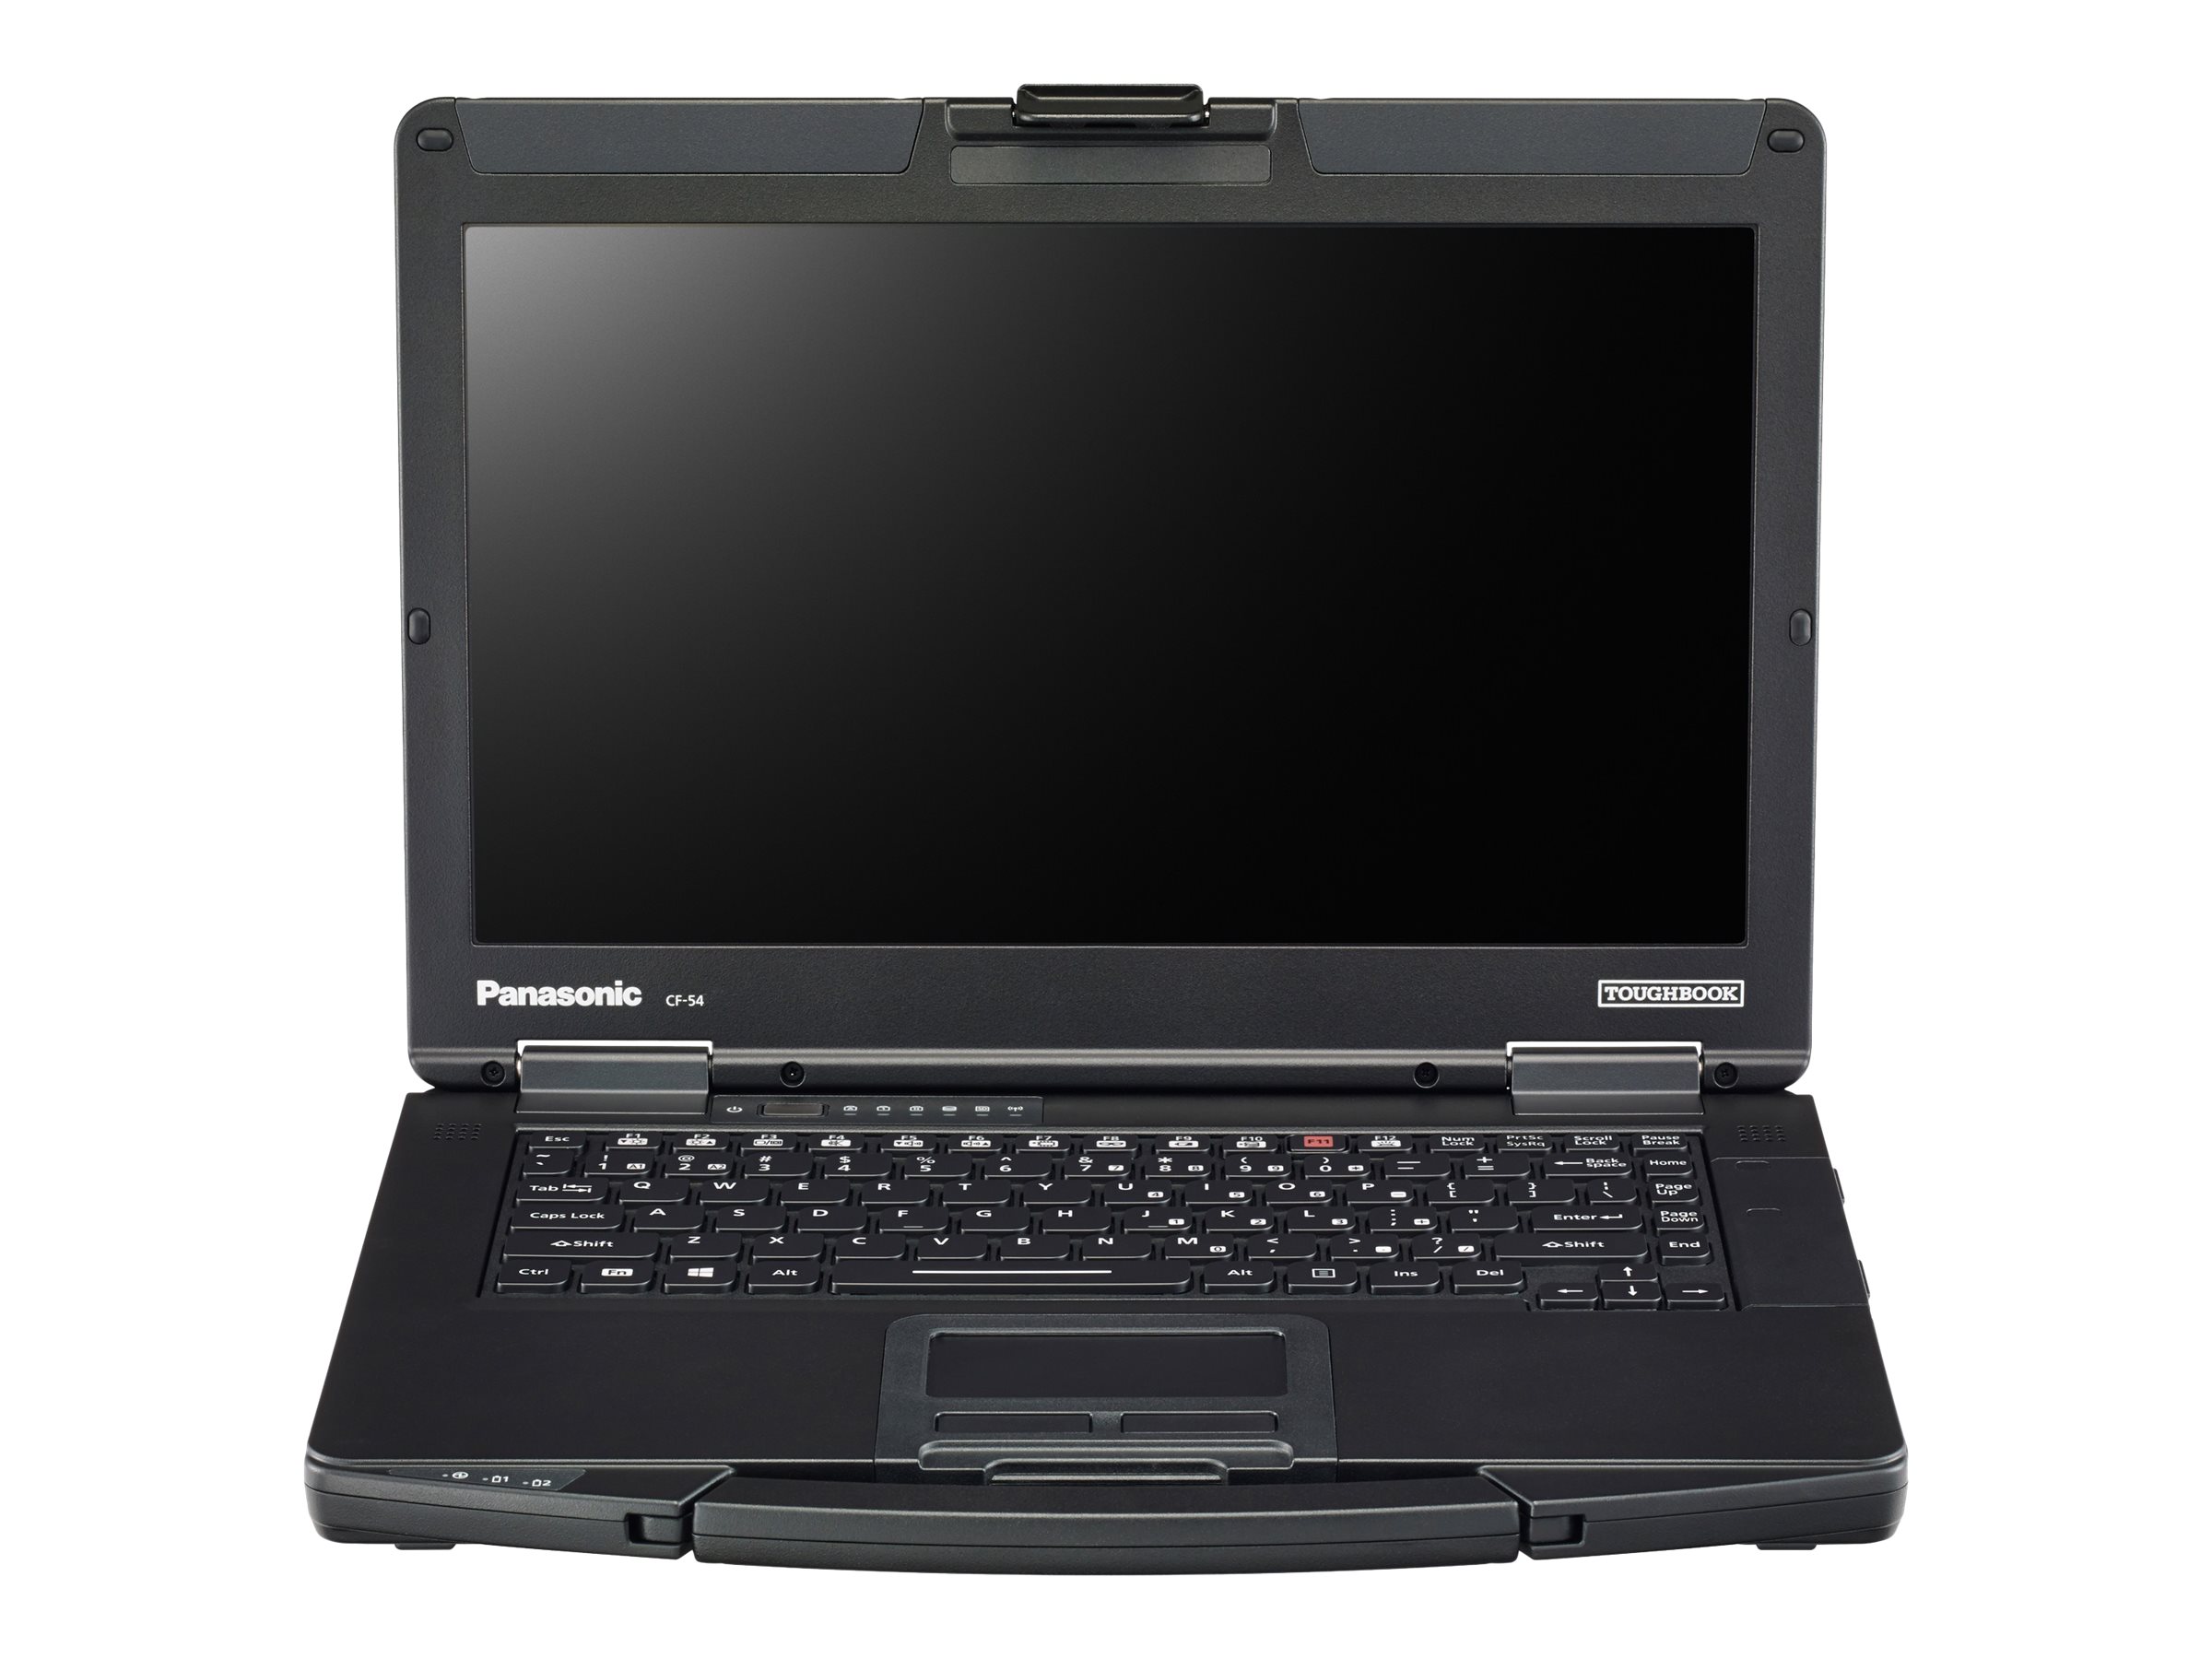 Panasonic Toughbook 54 Prime - Intel Core i5 - 7300U / up to 3.5 GHz - Win 10 Pro - HD Graphics 620 - 8 GB RAM - 256 GB SSD - DVD SuperMulti - 14" 1366 x 768 (HD) - with Toughbook Preferred - image 3 of 16